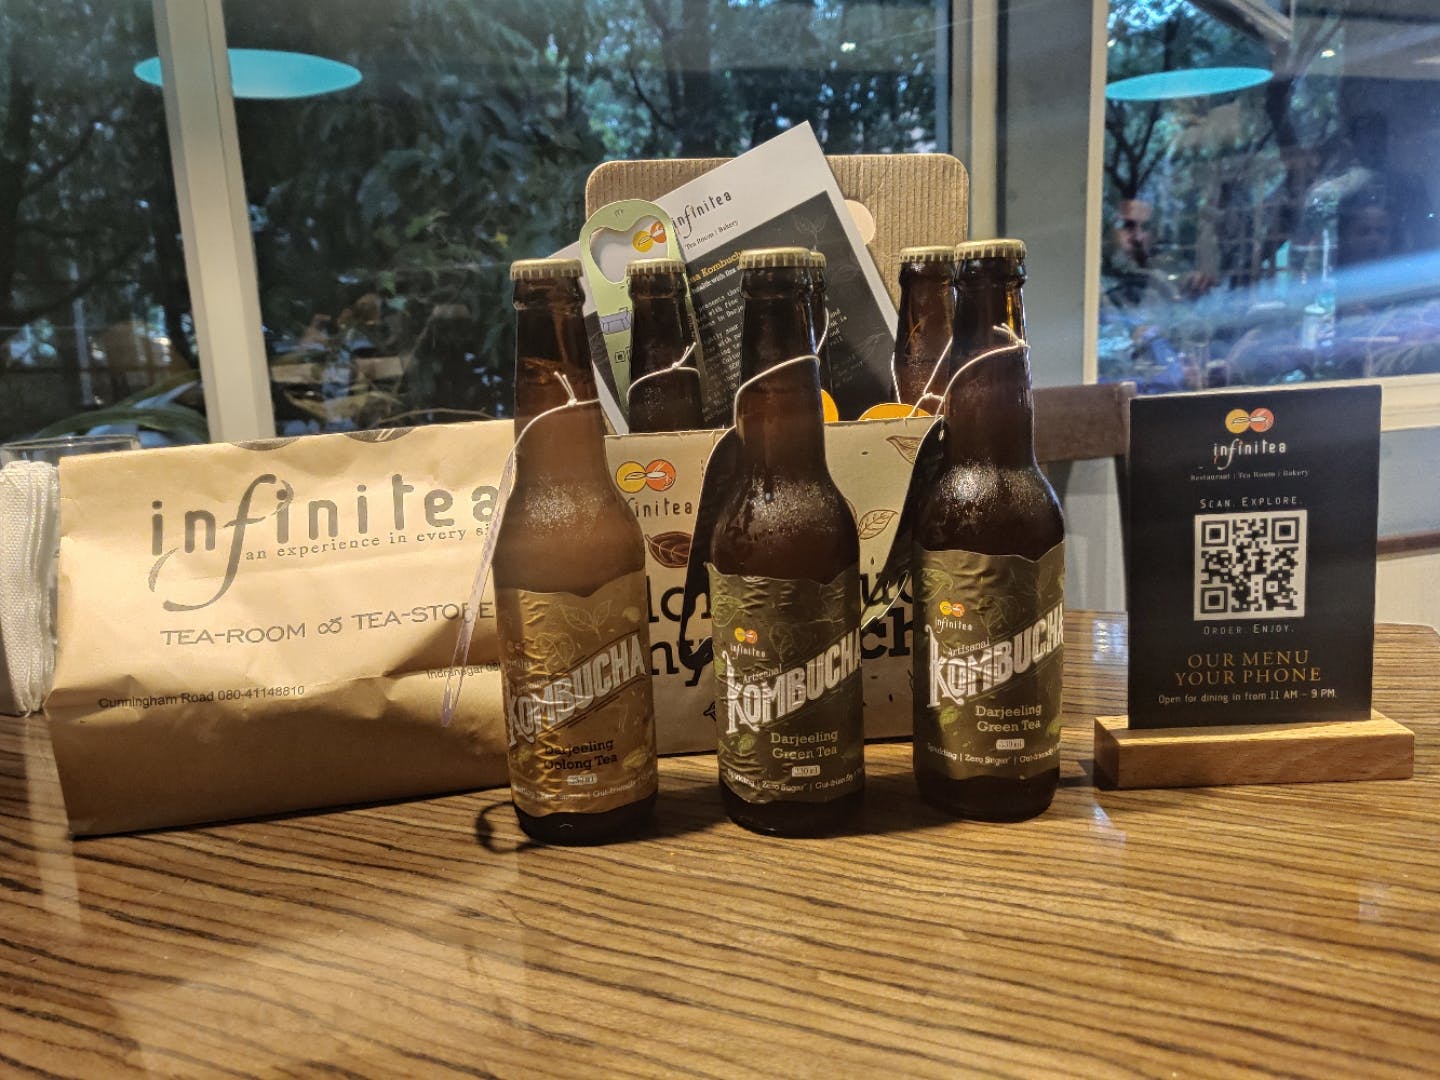 If you love kombucha - here's good news for you ! 
The famous tea room in Bangalore - Infinitea has introduced 3 flavours of Kombucha - Darjeeling Oolong tea, Darjeeling Black Tea and Darjeeling Green tea. A bottle of 330 ml is priced at INR 250.